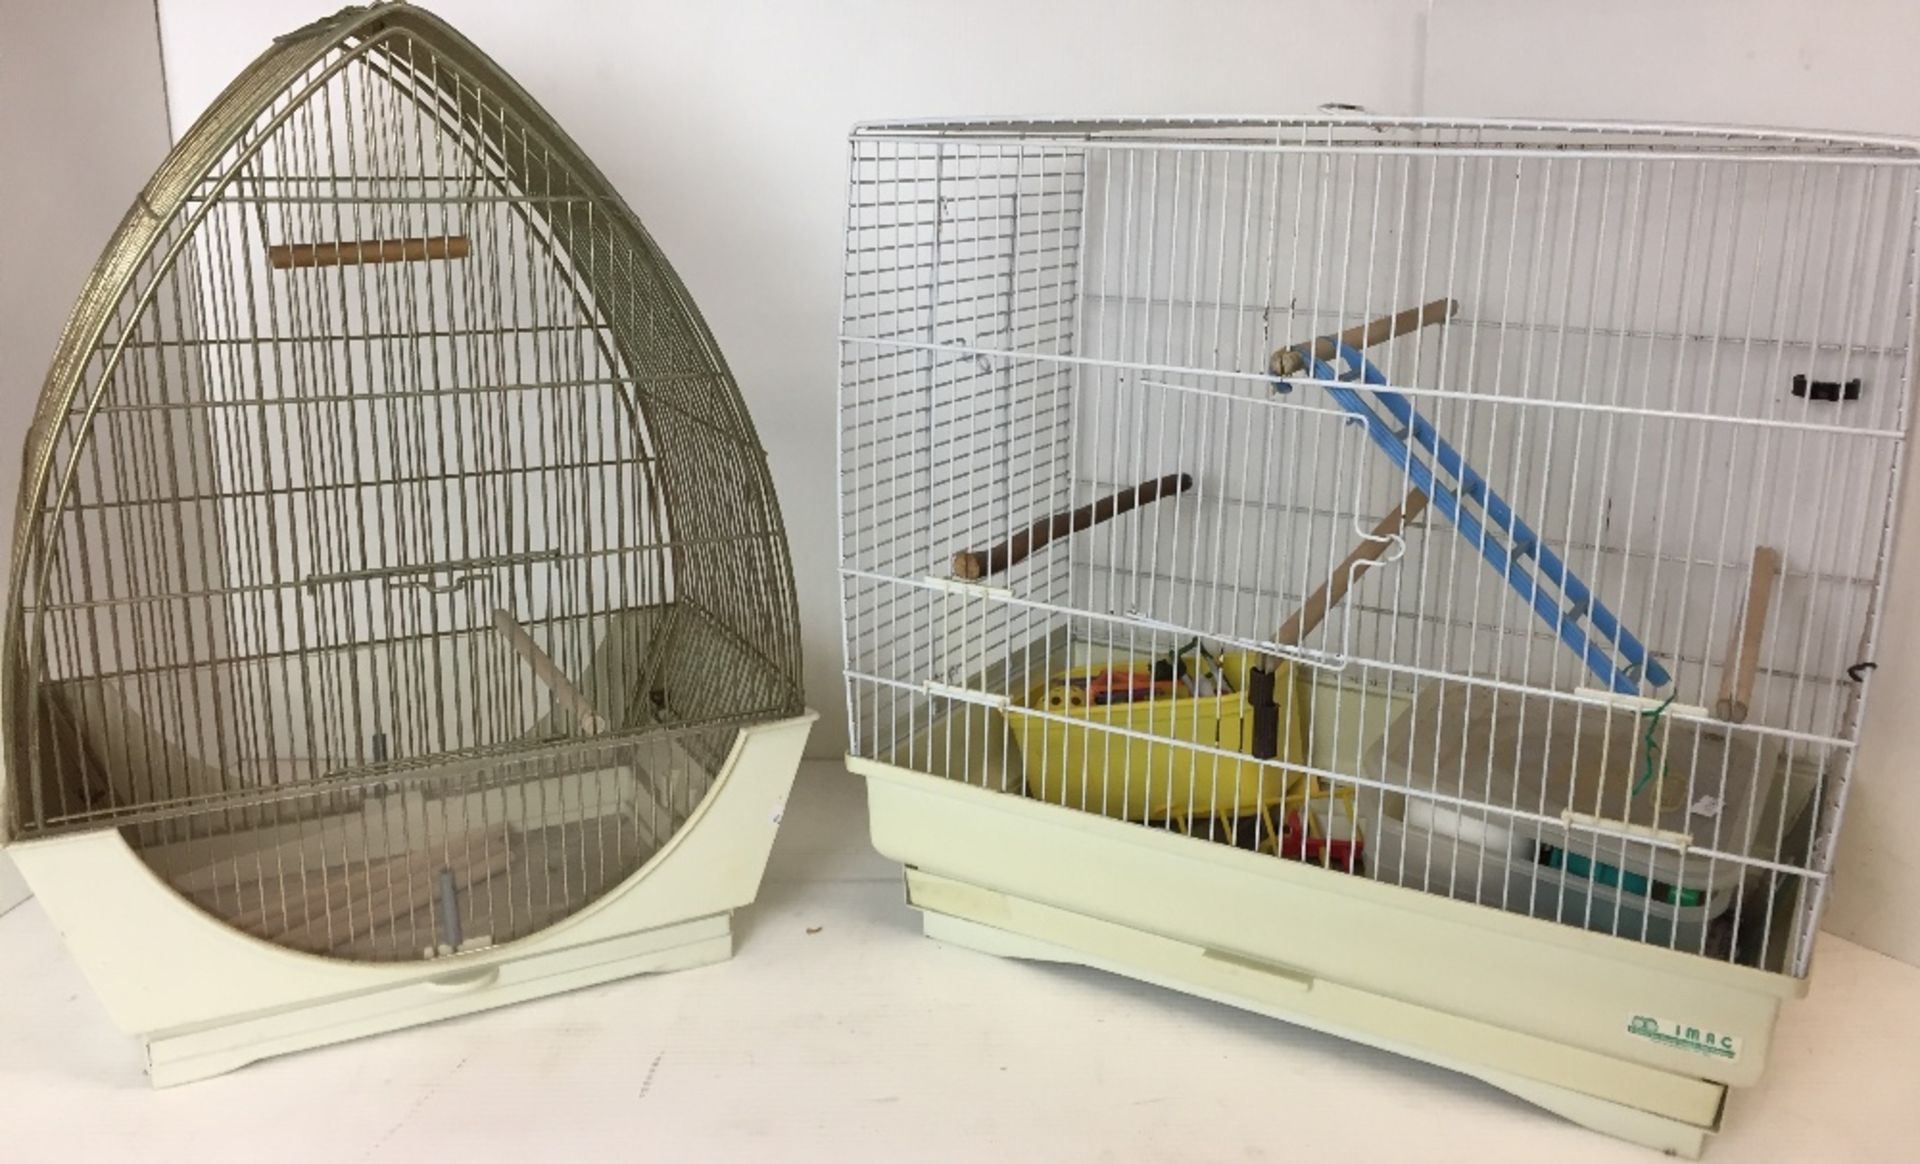 Two bird cages - one 51 x 29 x 48cm high and the other 40 max x 25 x 52cm high and bird cage